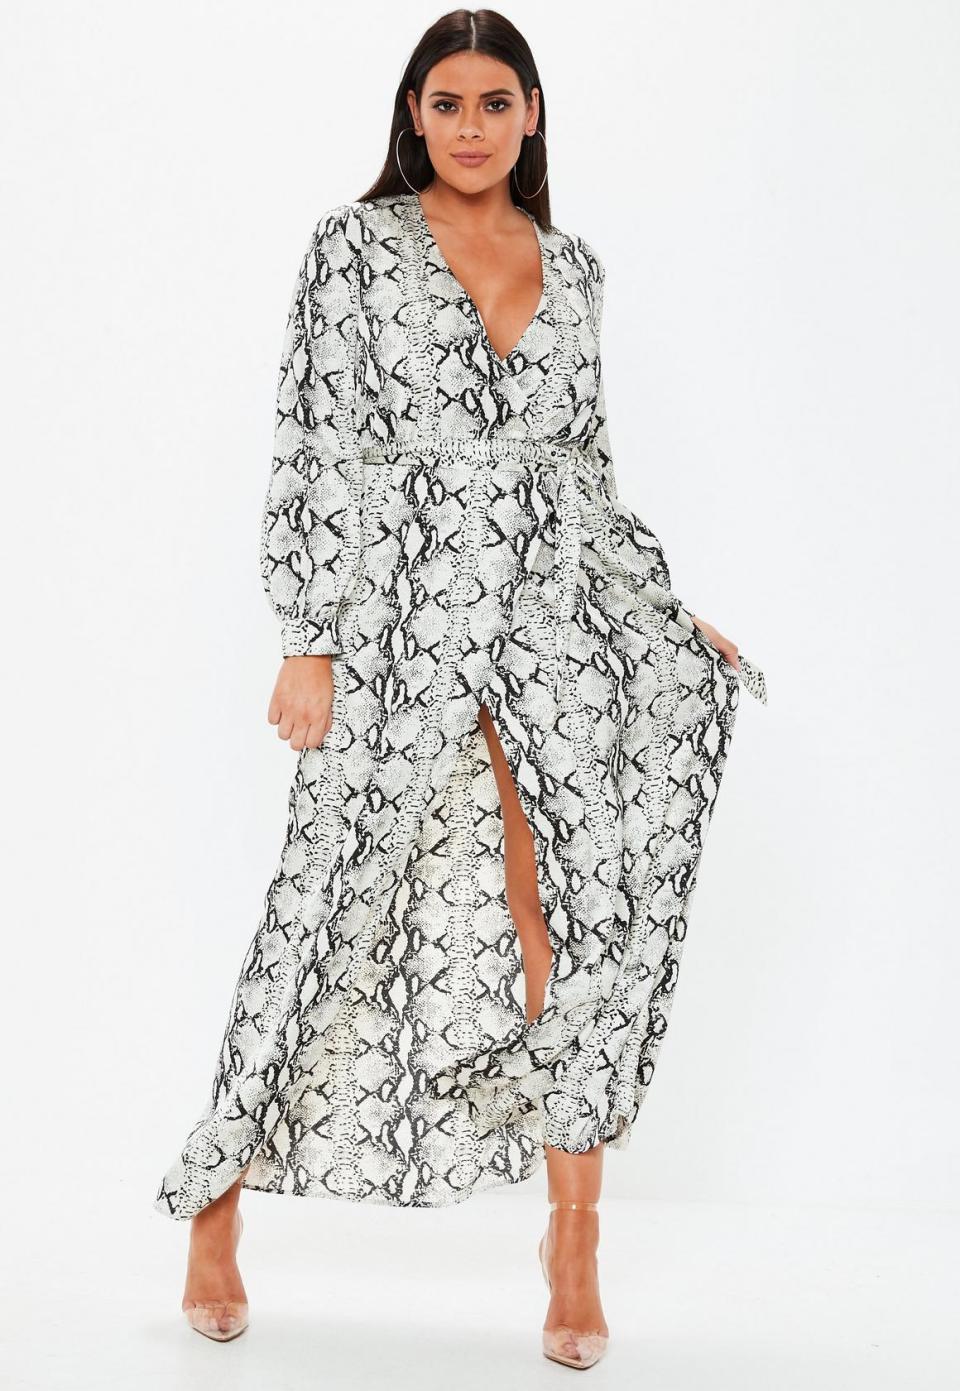 Missguided Gray Snake Print Plunge Maxi Dress (Photo: Missguided)